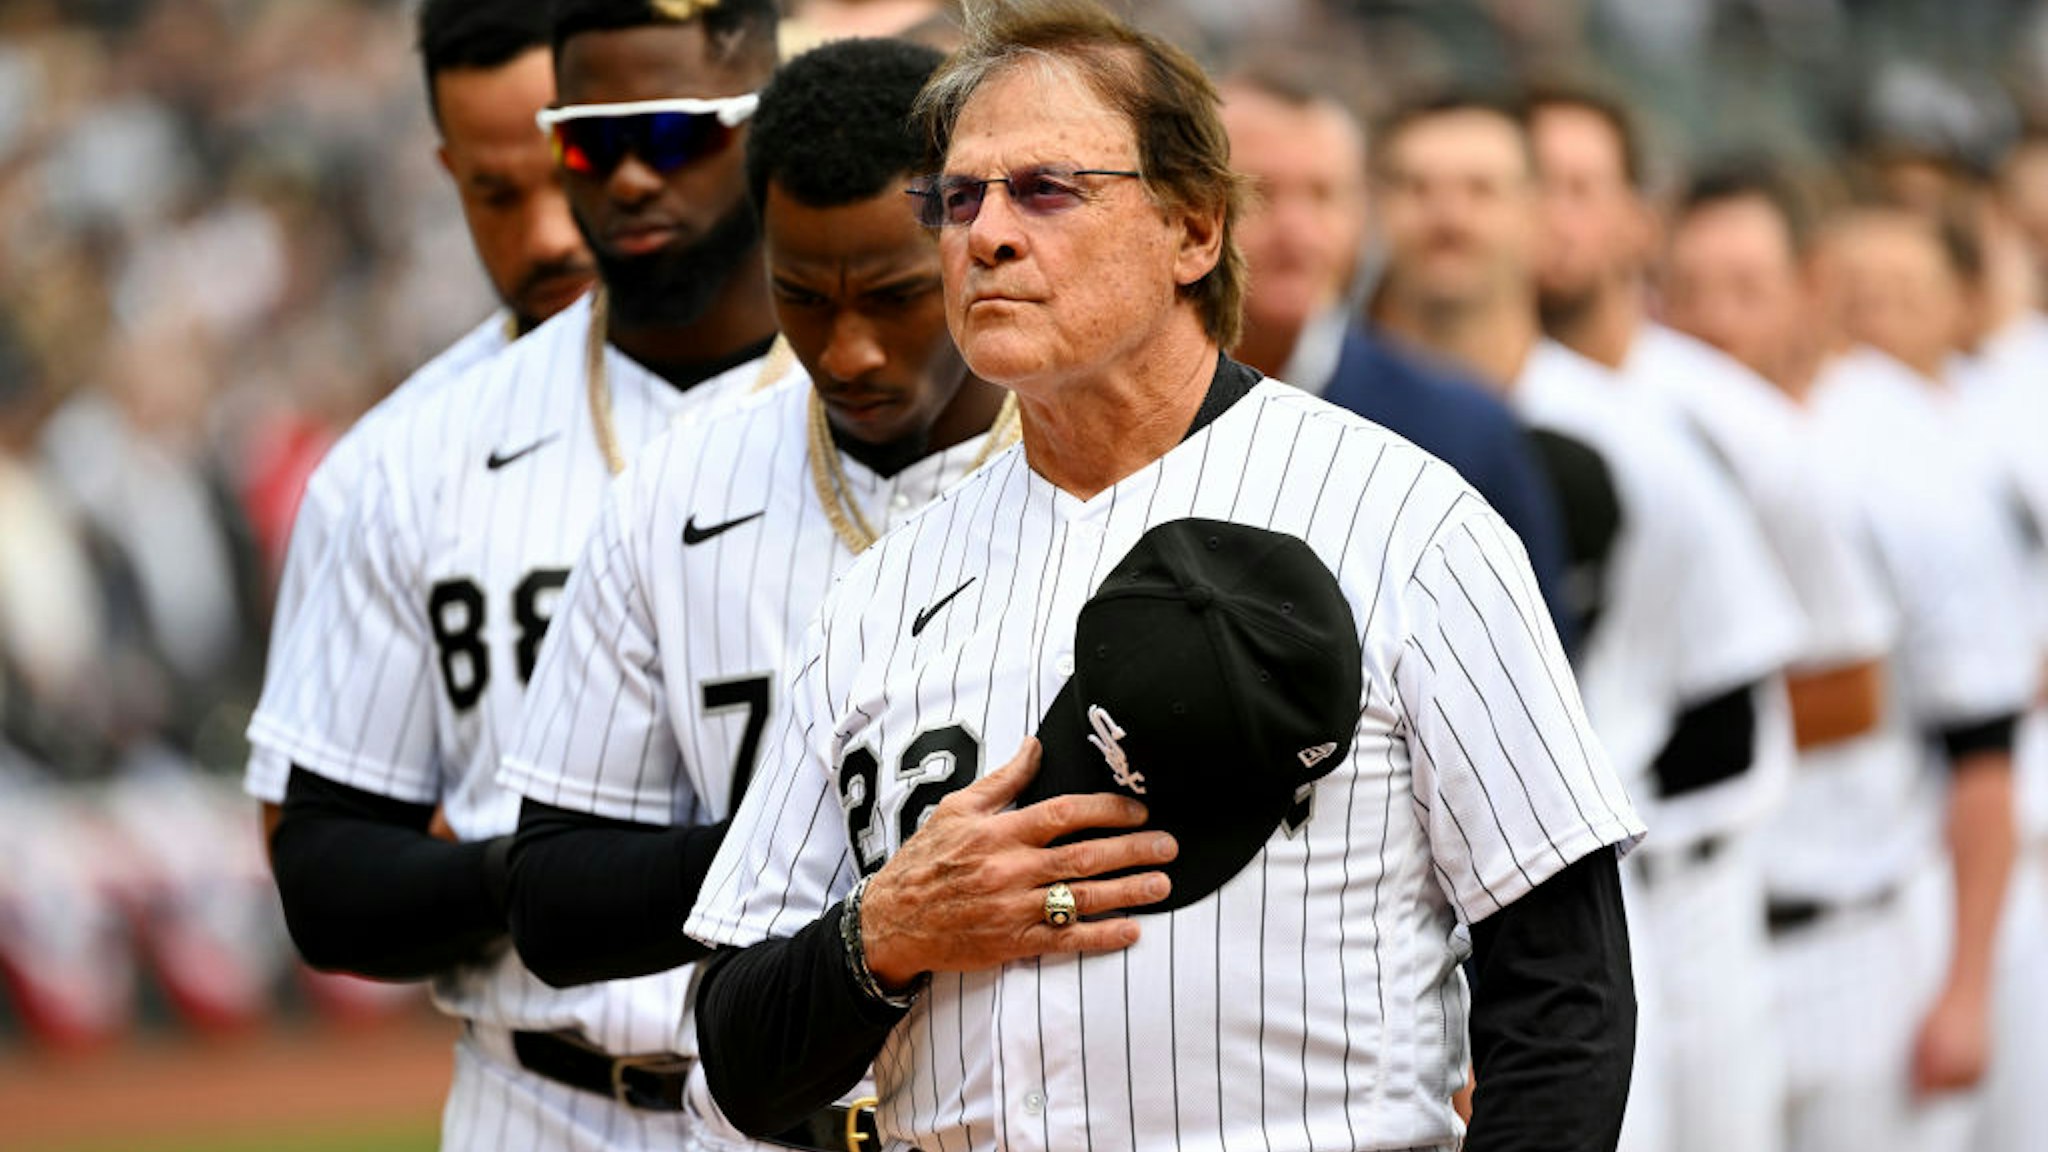 CHICAGO - APRIL 12: Manager Tony La Russa #22 of the Chicago White Sox looks on during the National Anthem prior to the game against the Seattle Mariners during Opening Day on April 12, 2022 at Guaranteed Rate Field in Chicago, Illinois. (Photo by Ron Vesely/Getty Images)